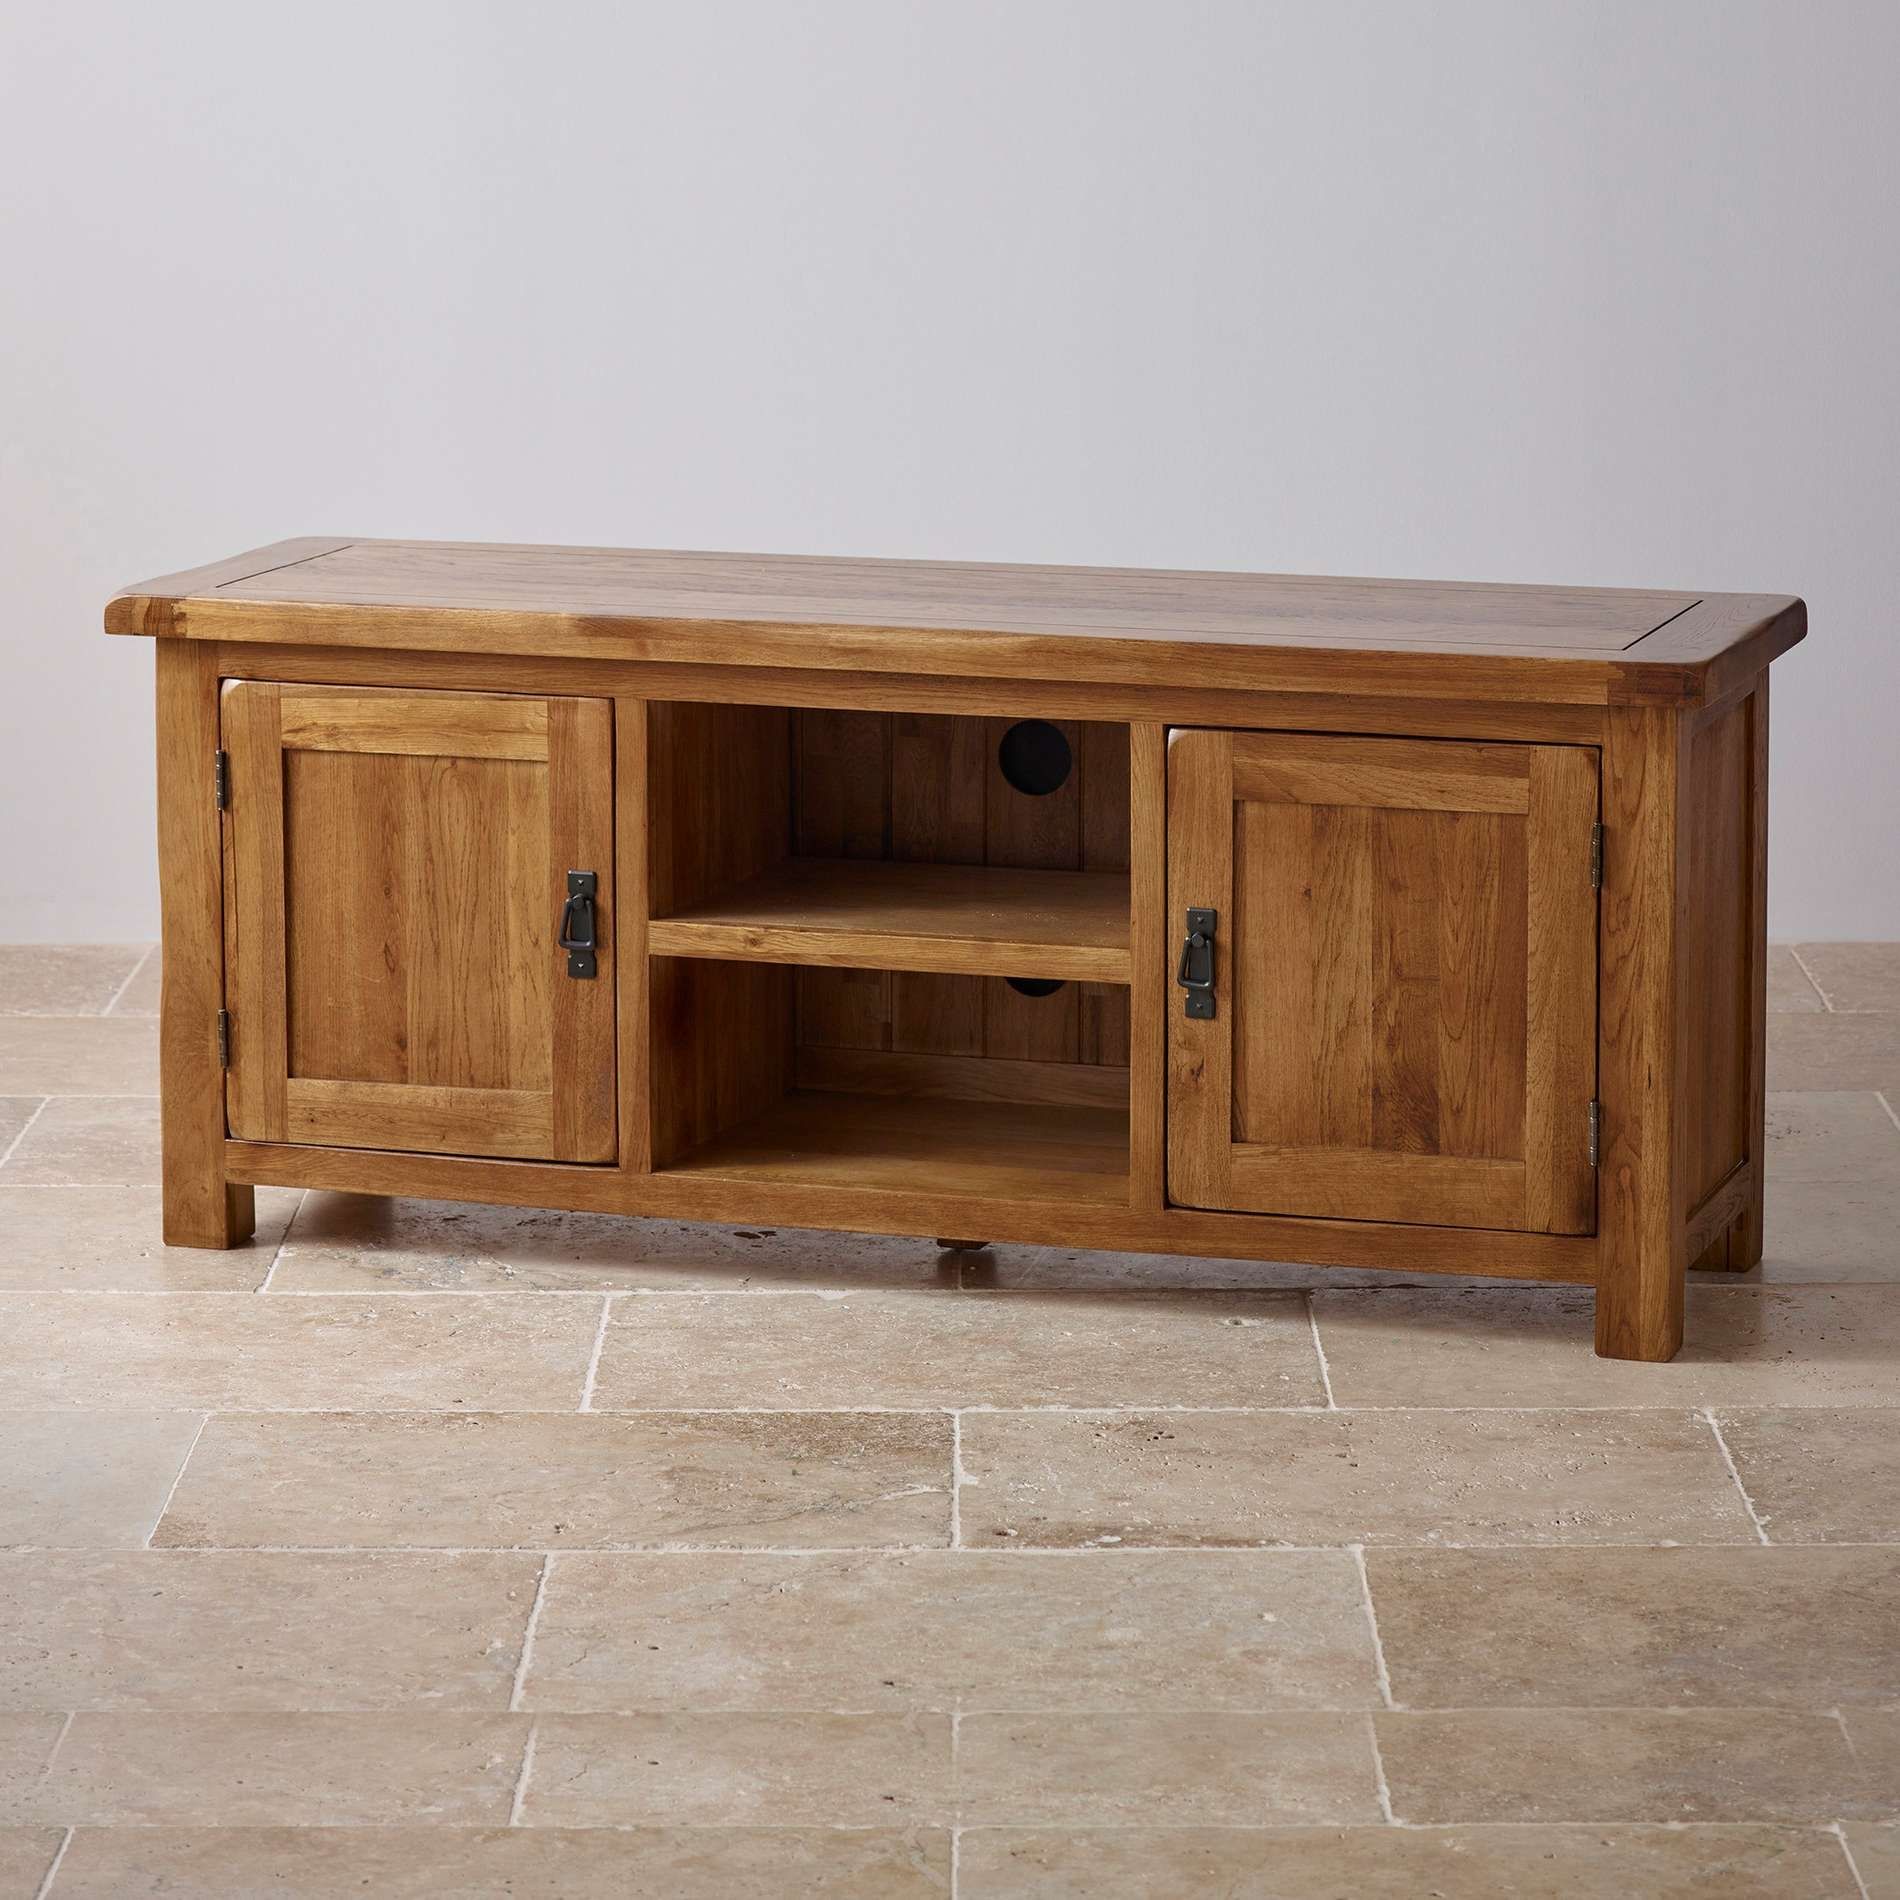 Cotswold Rustic Solid Oak Tv And Dvd Cabinet Oak Furniture King Within Rustic Wood Tv Cabinets (Gallery 19 of 20)